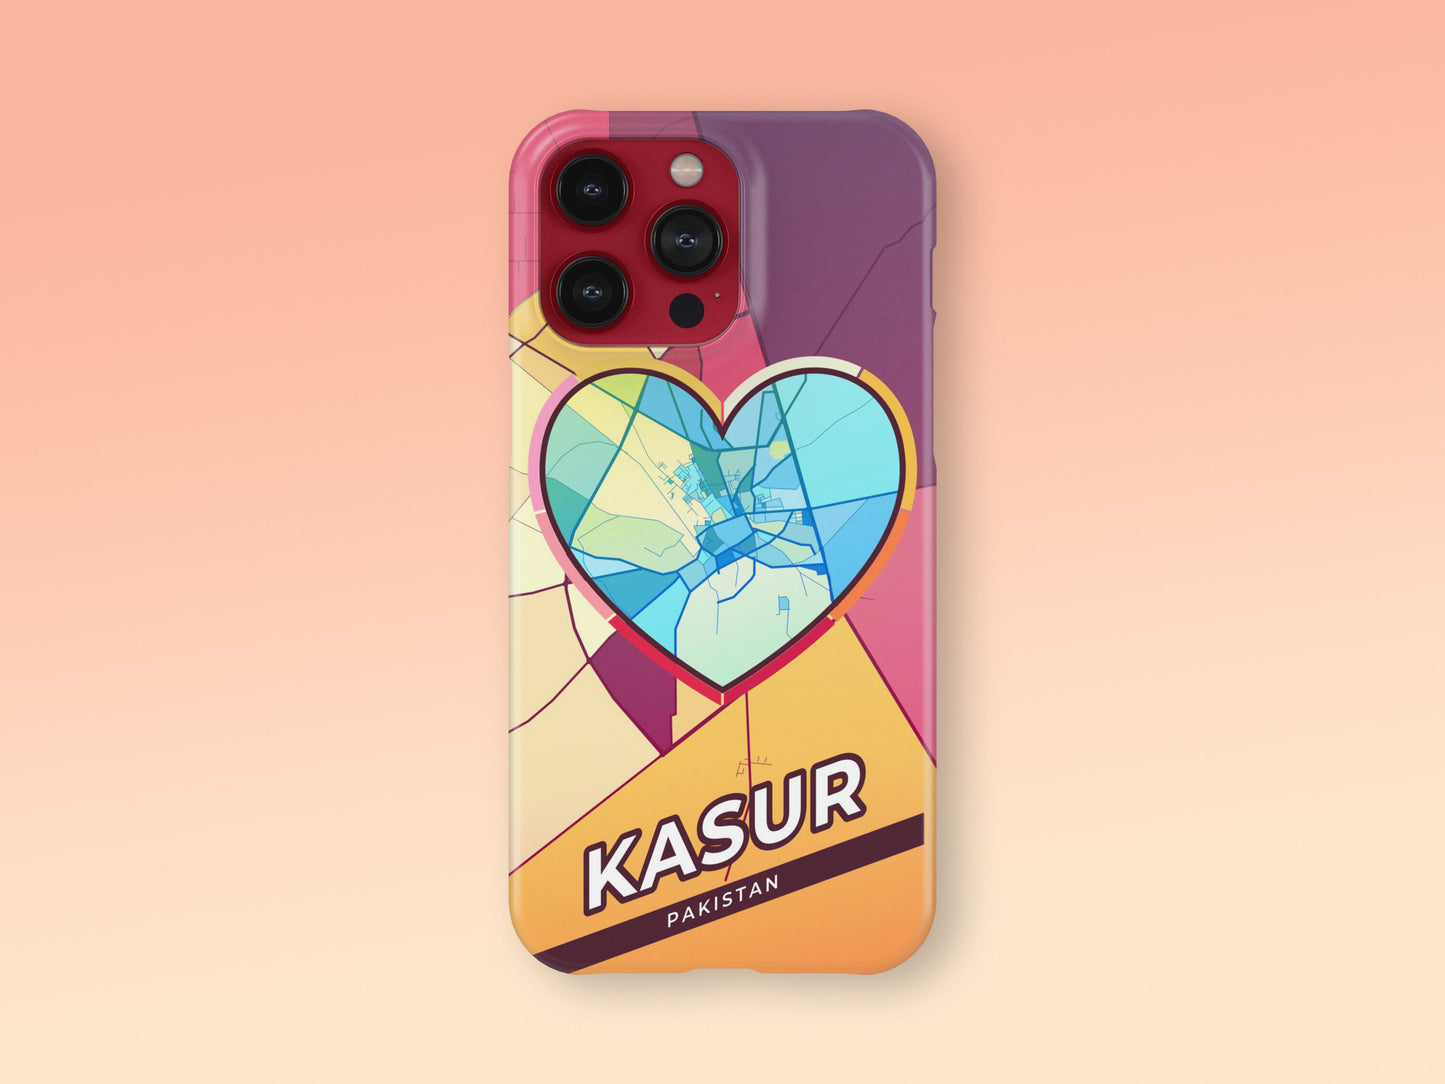 Kasur Pakistan slim phone case with colorful icon. Birthday, wedding or housewarming gift. Couple match cases. 2